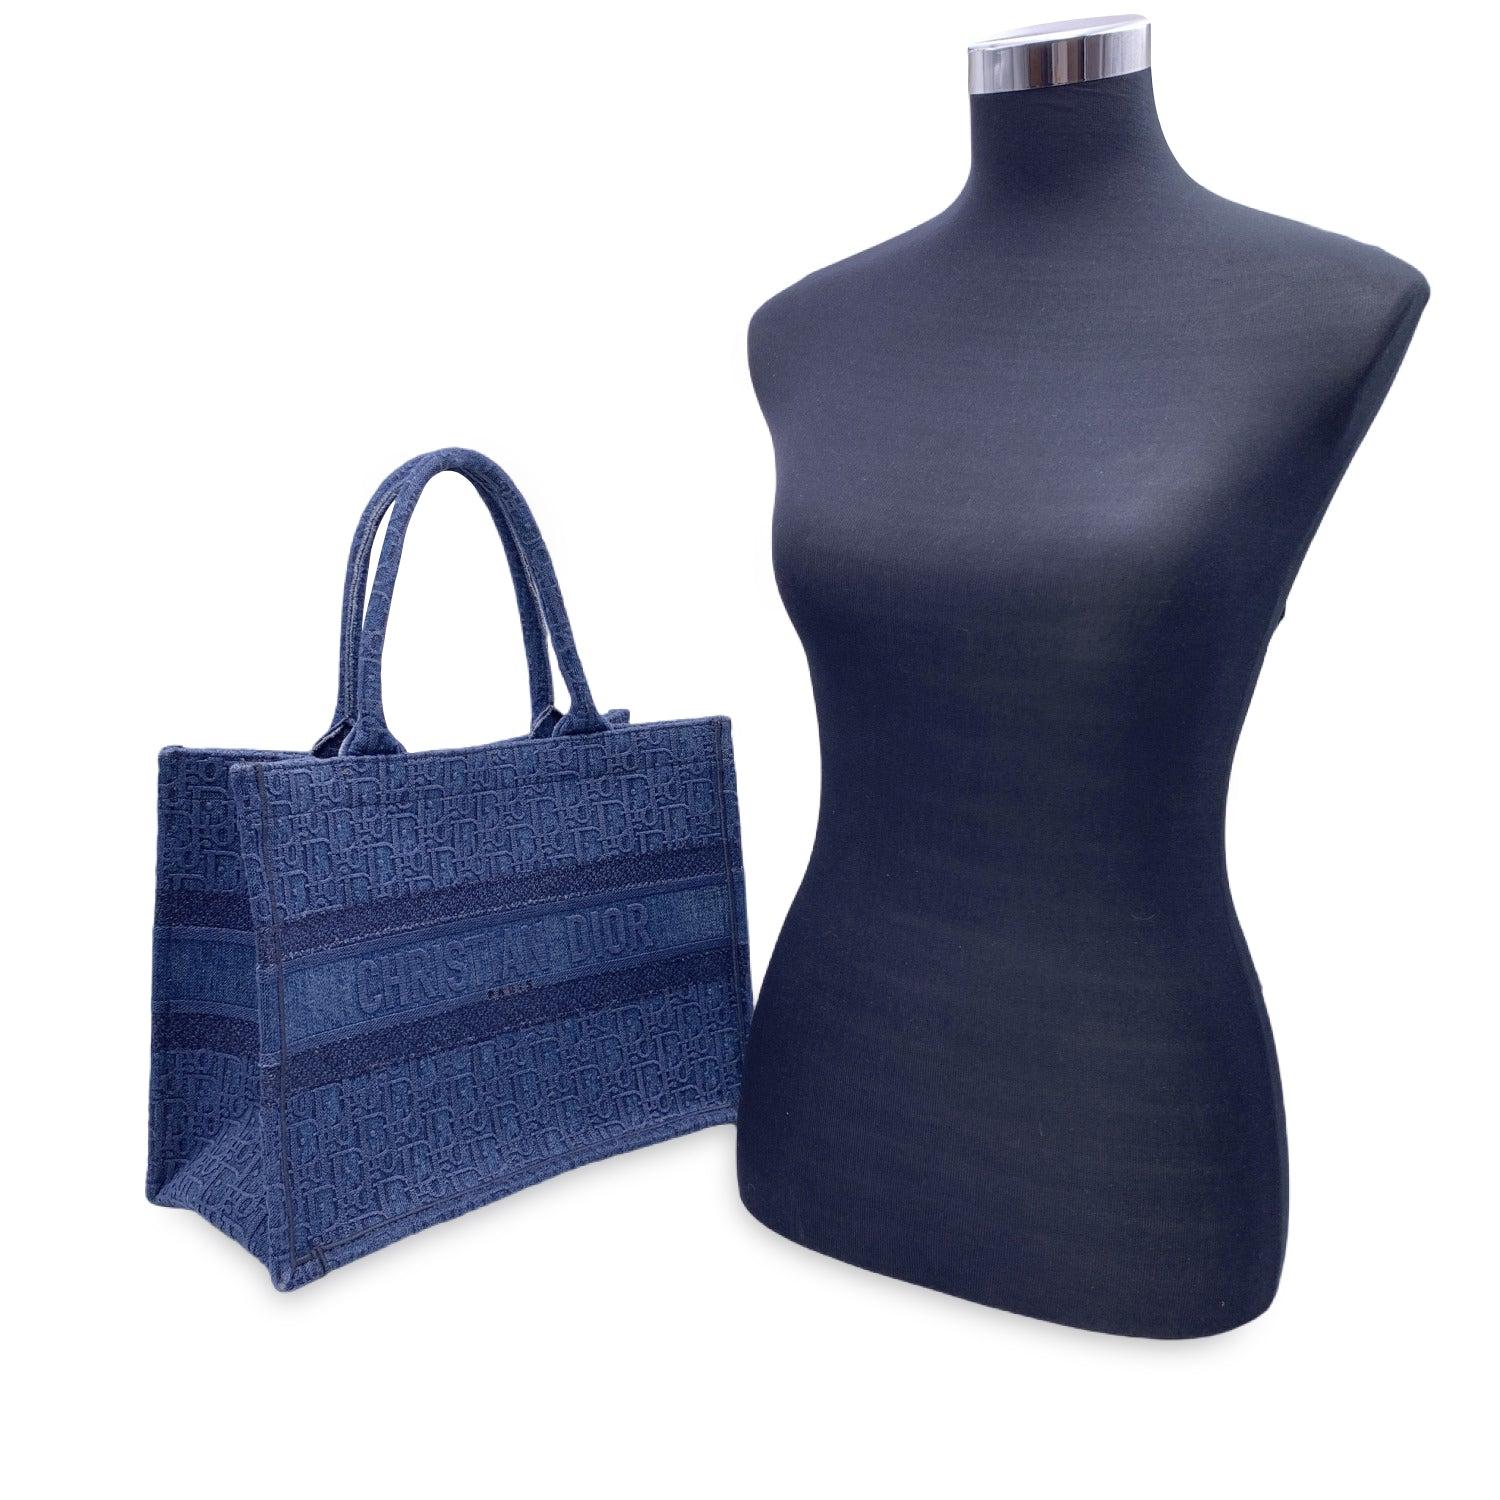 Iconic Christian Dior blue Oblique denim canvas 'Book Tote' from the 2019 Fall/Winter collection.. This is the Medium size. It features and open top and double top handles. It is embellished with the 'CHRISTIAN DIOR PARIS' writing on the front,